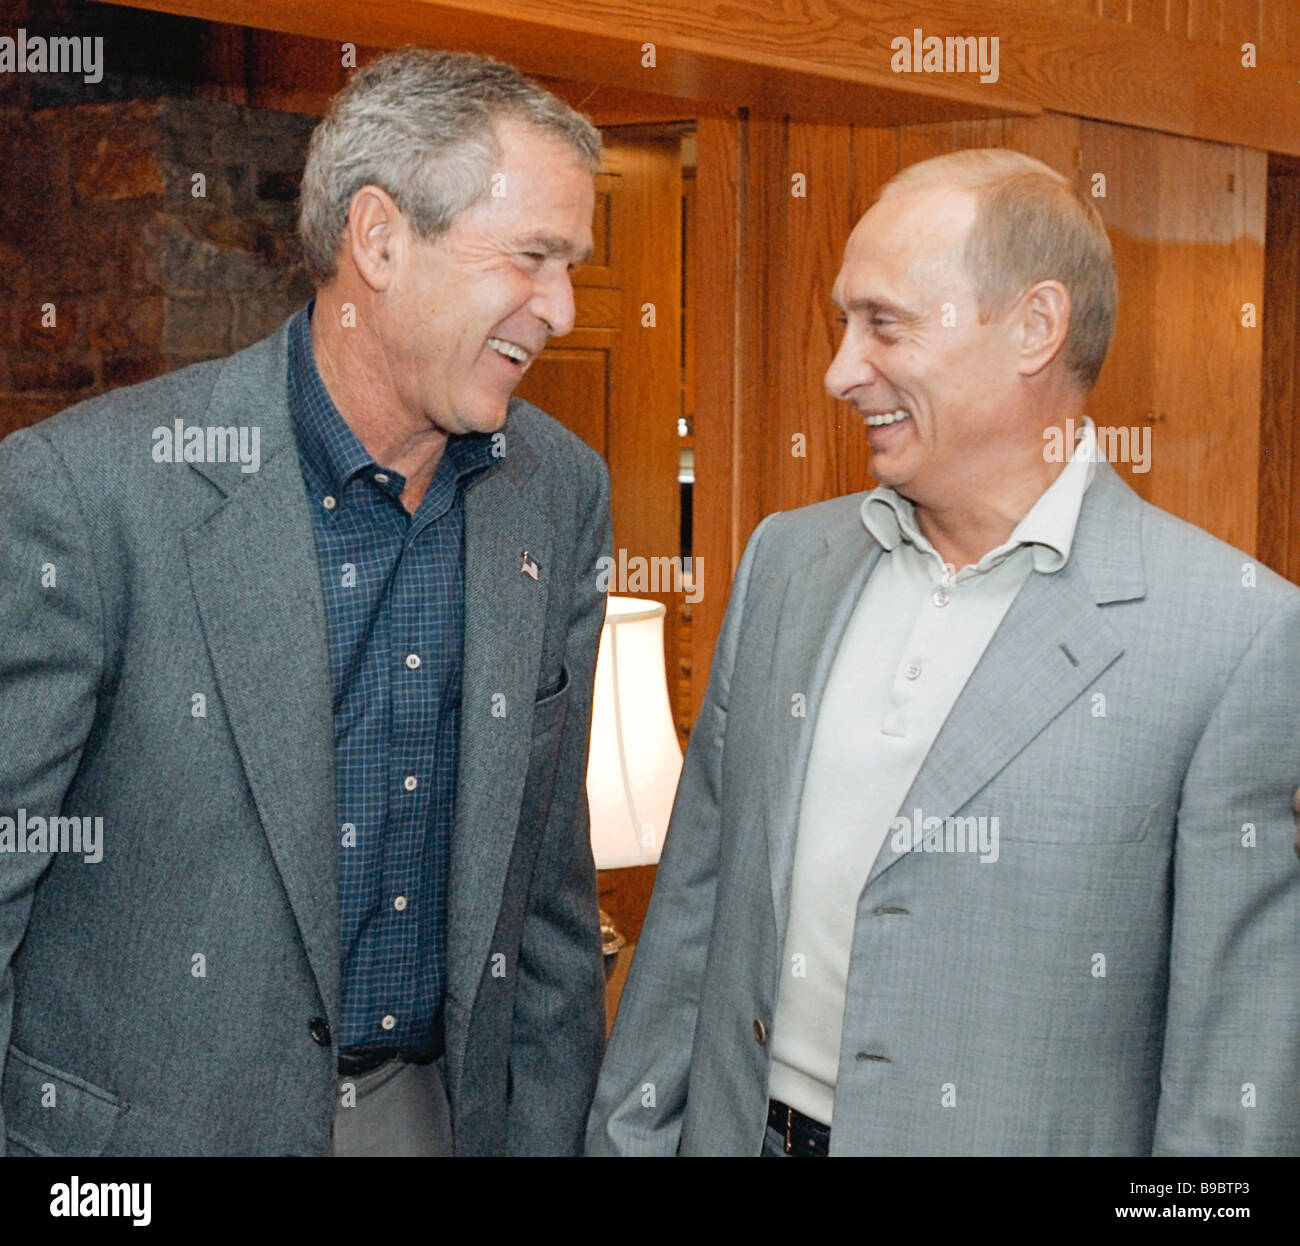 Russian President Vladimir Putin met with US President George W Bush at his  mountain retreat in Camp David Maryland while Stock Photo - Alamy